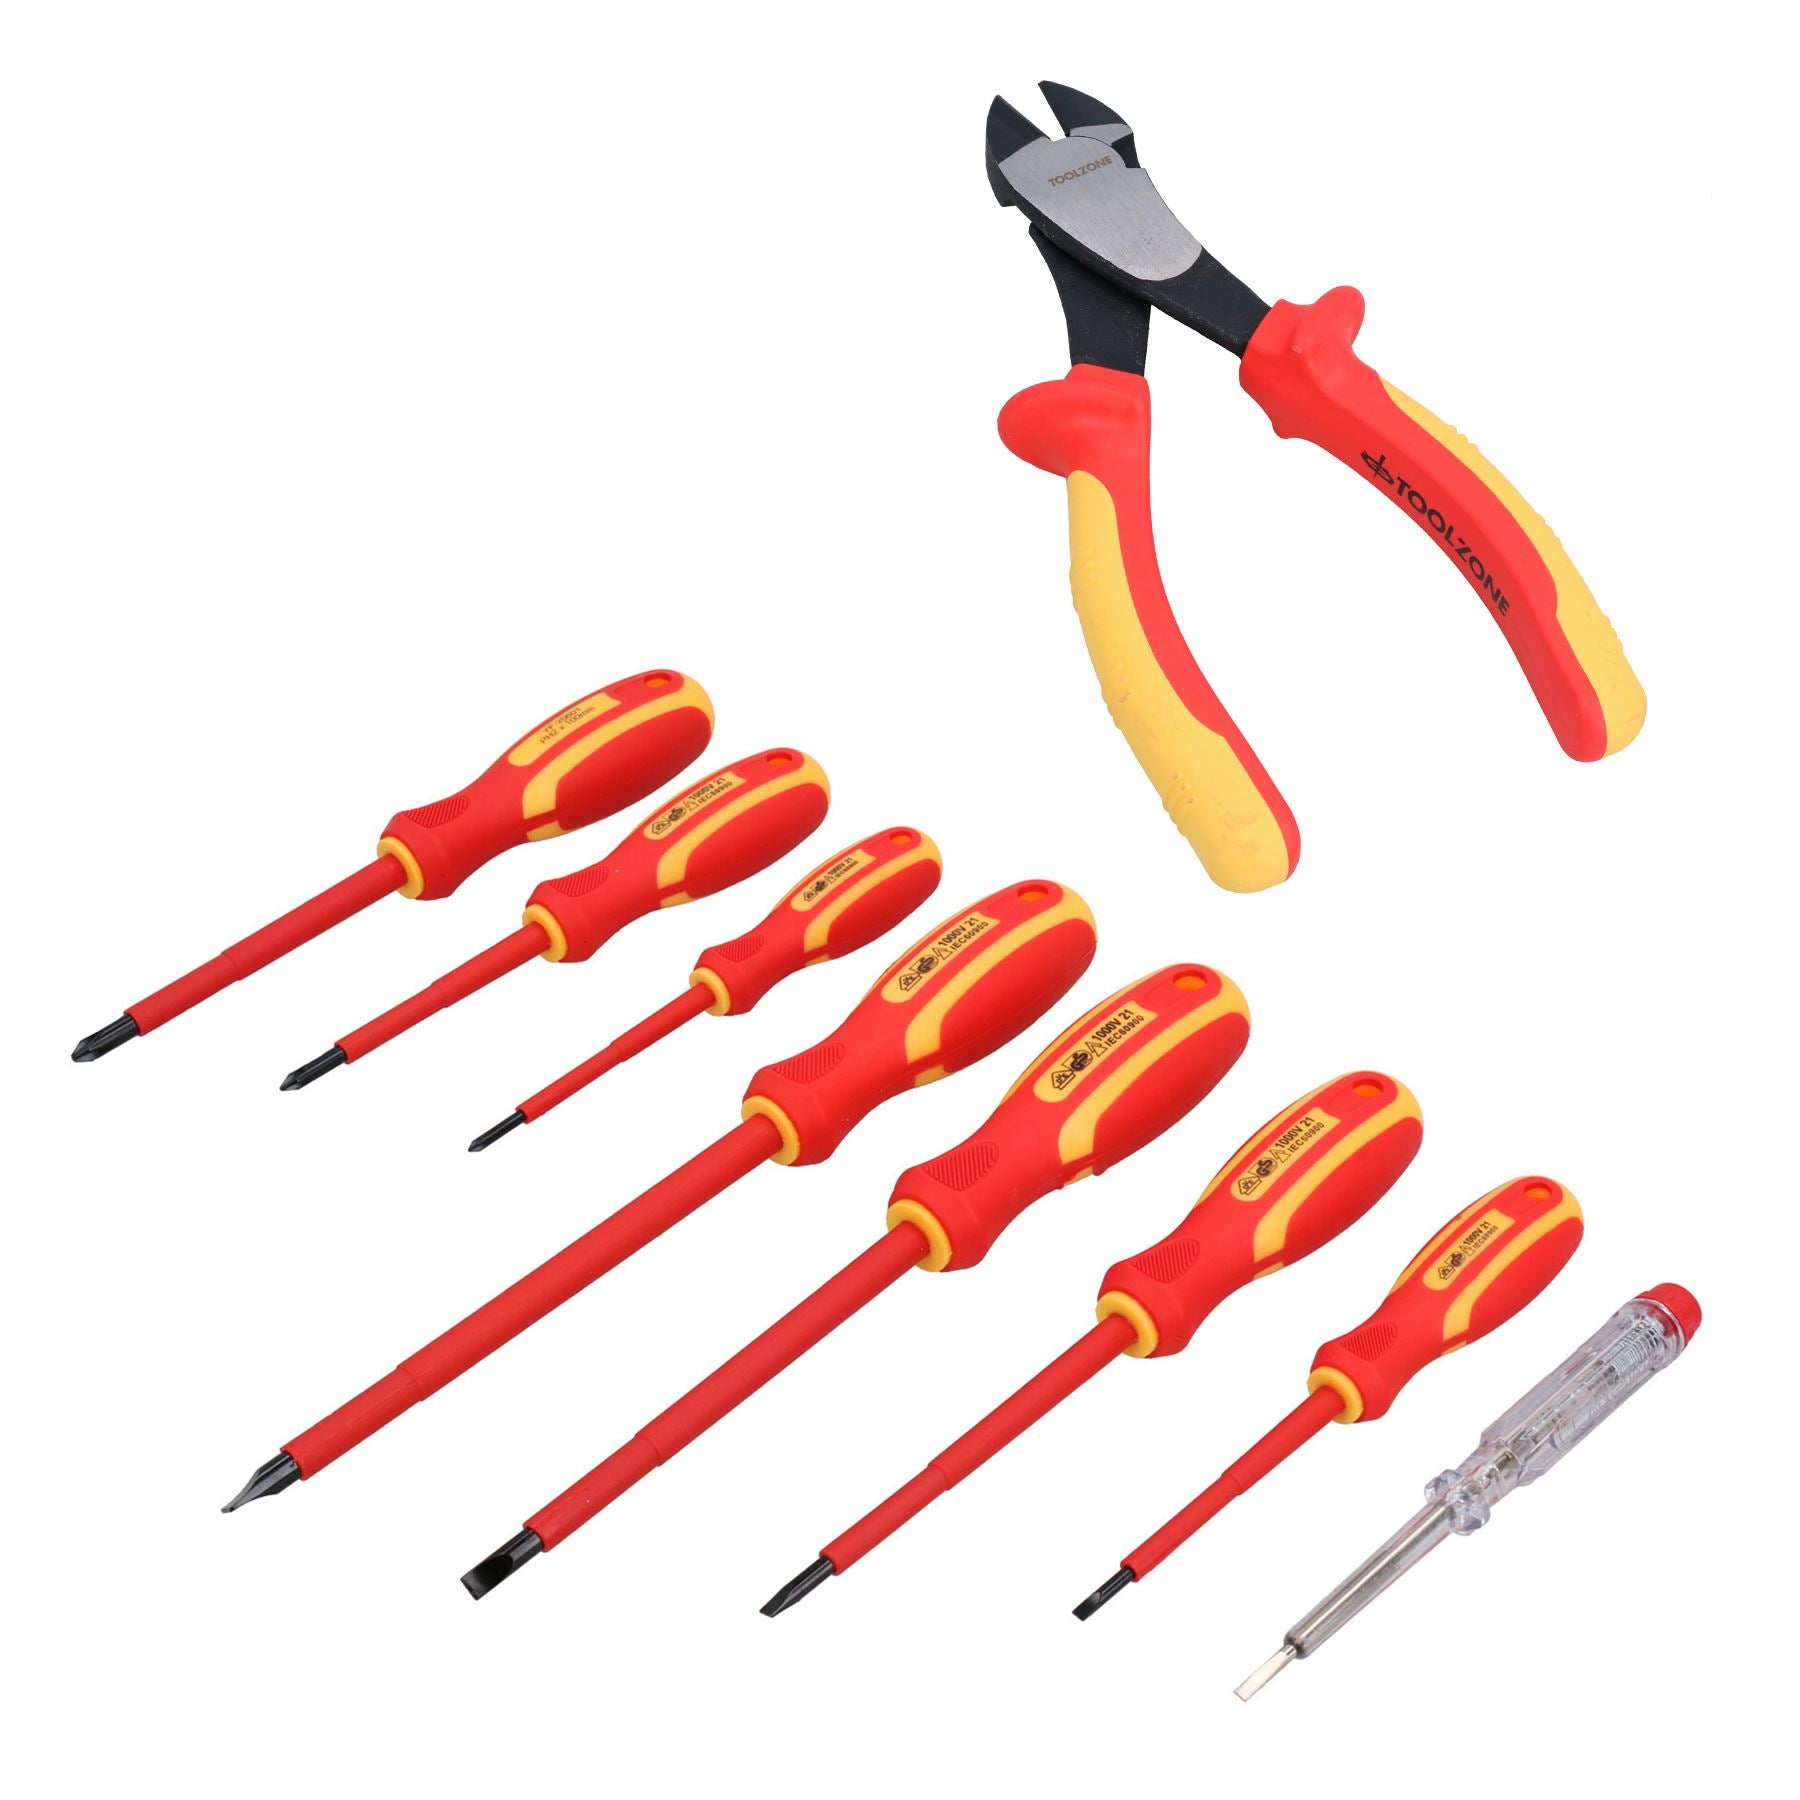 7.5” VDE Electrician Electrical Diagonal Side Wire Cutting Pliers + 8pc Screwdrivers